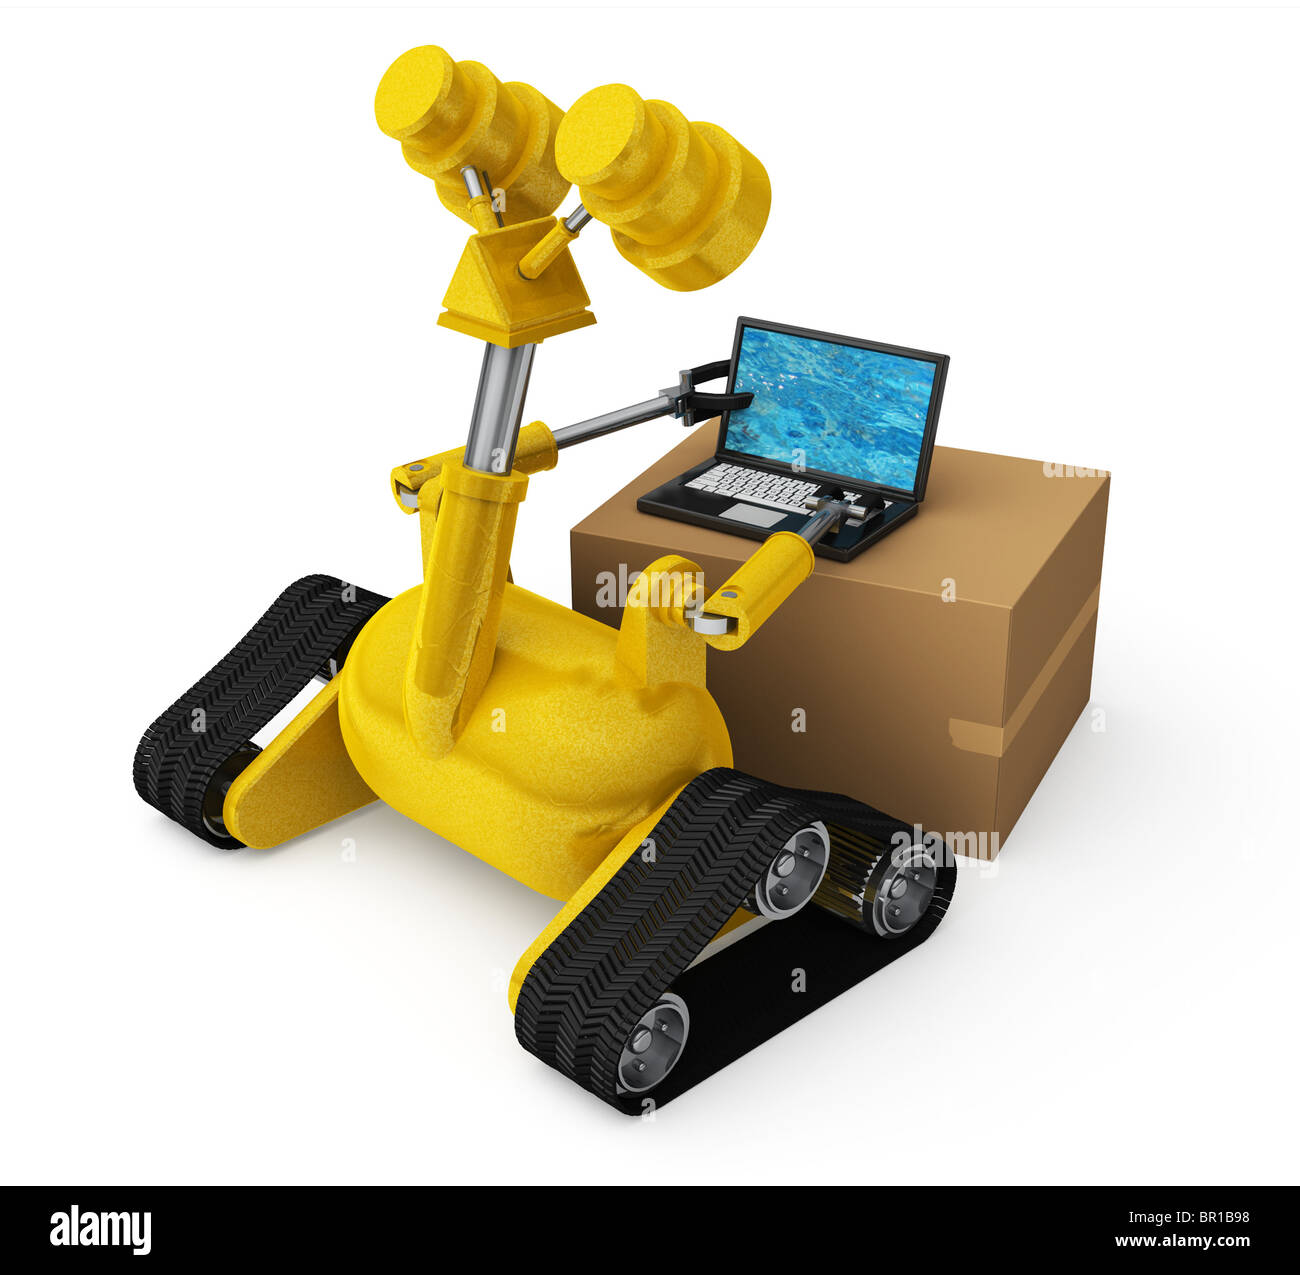 A yellow robot trying to use a laptop computer on top of a cardboard box Stock Photo